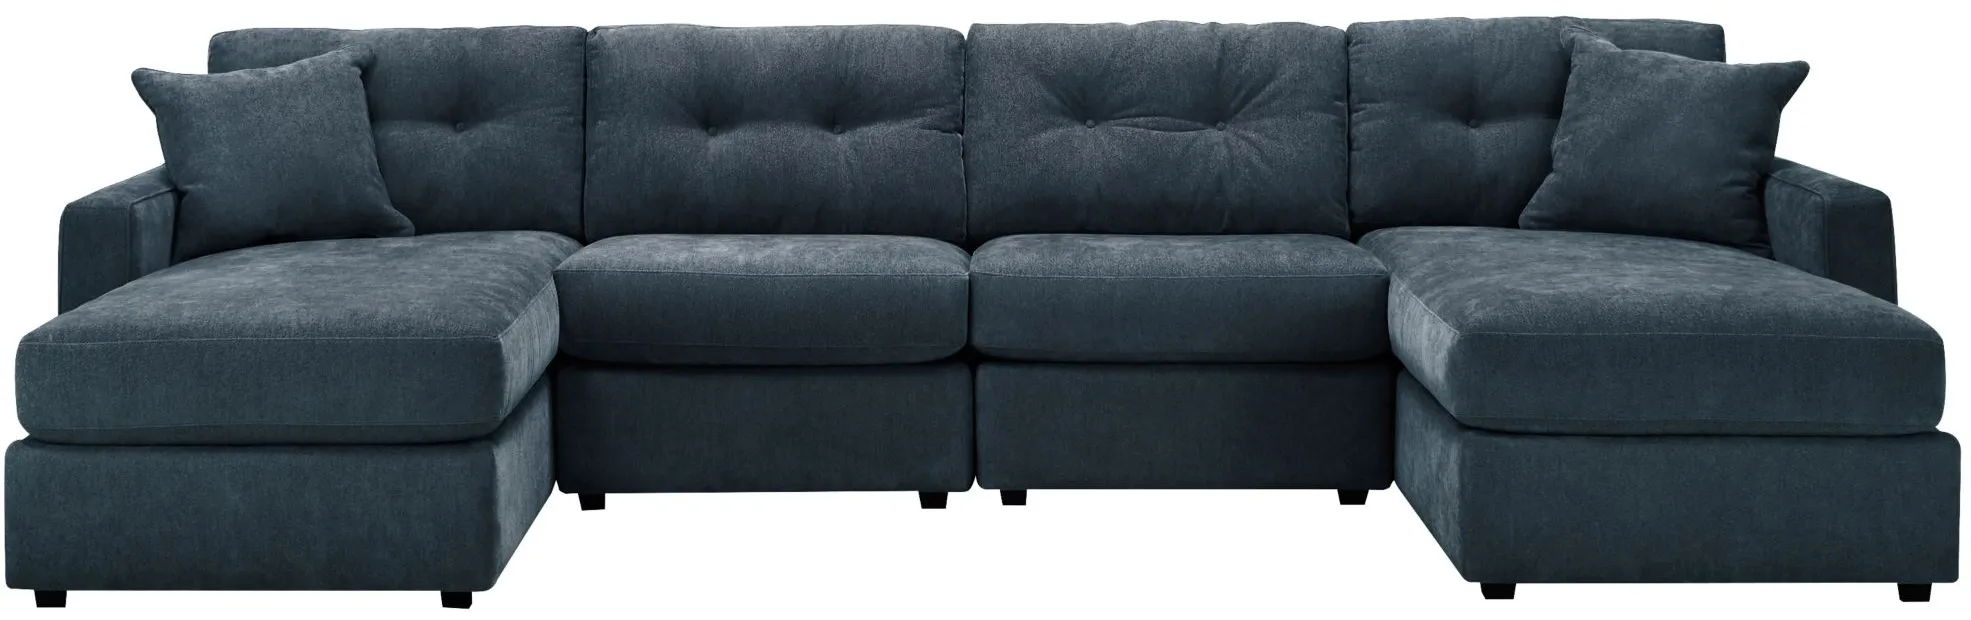 ModularOne 4-pc. Sectional in Navy by H.M. Richards